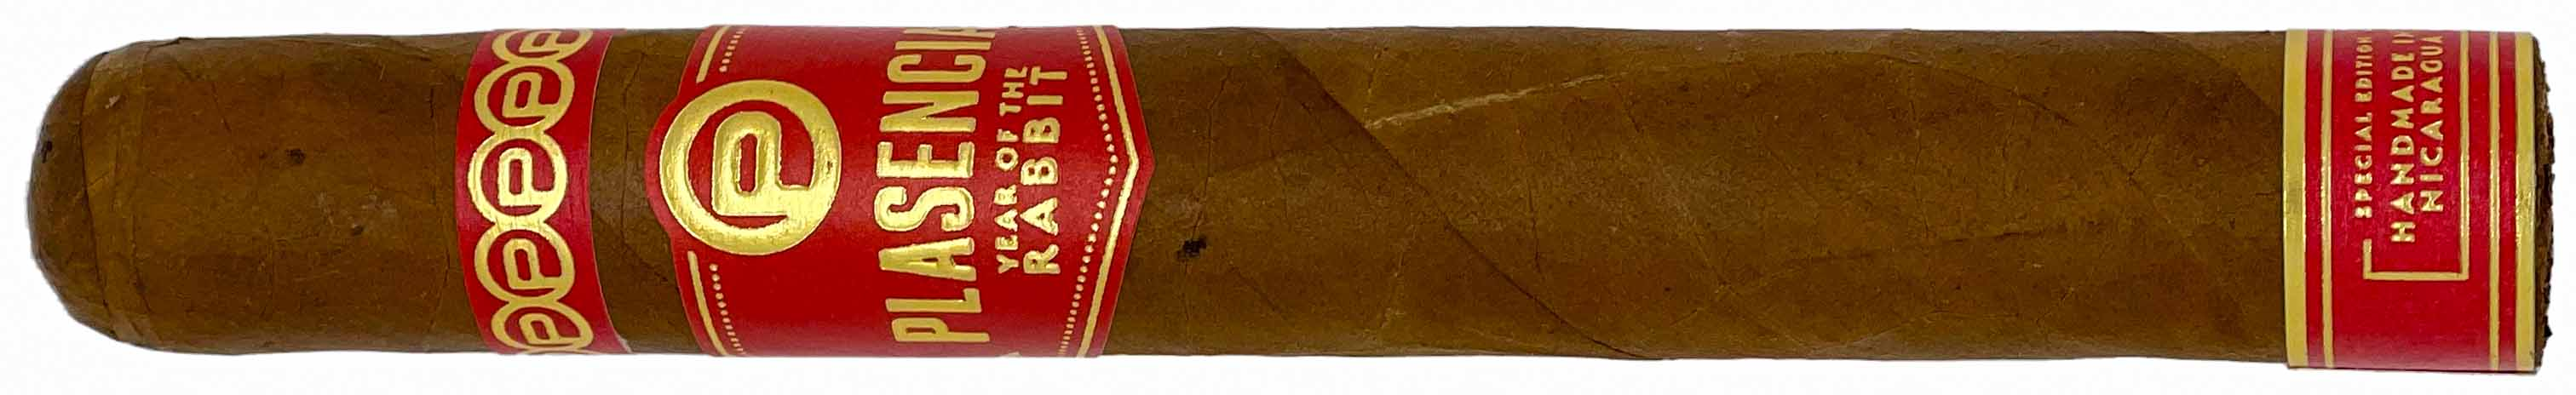 Plasencia Year of the Rabbit Cigar - Extremelly Rare Cigars